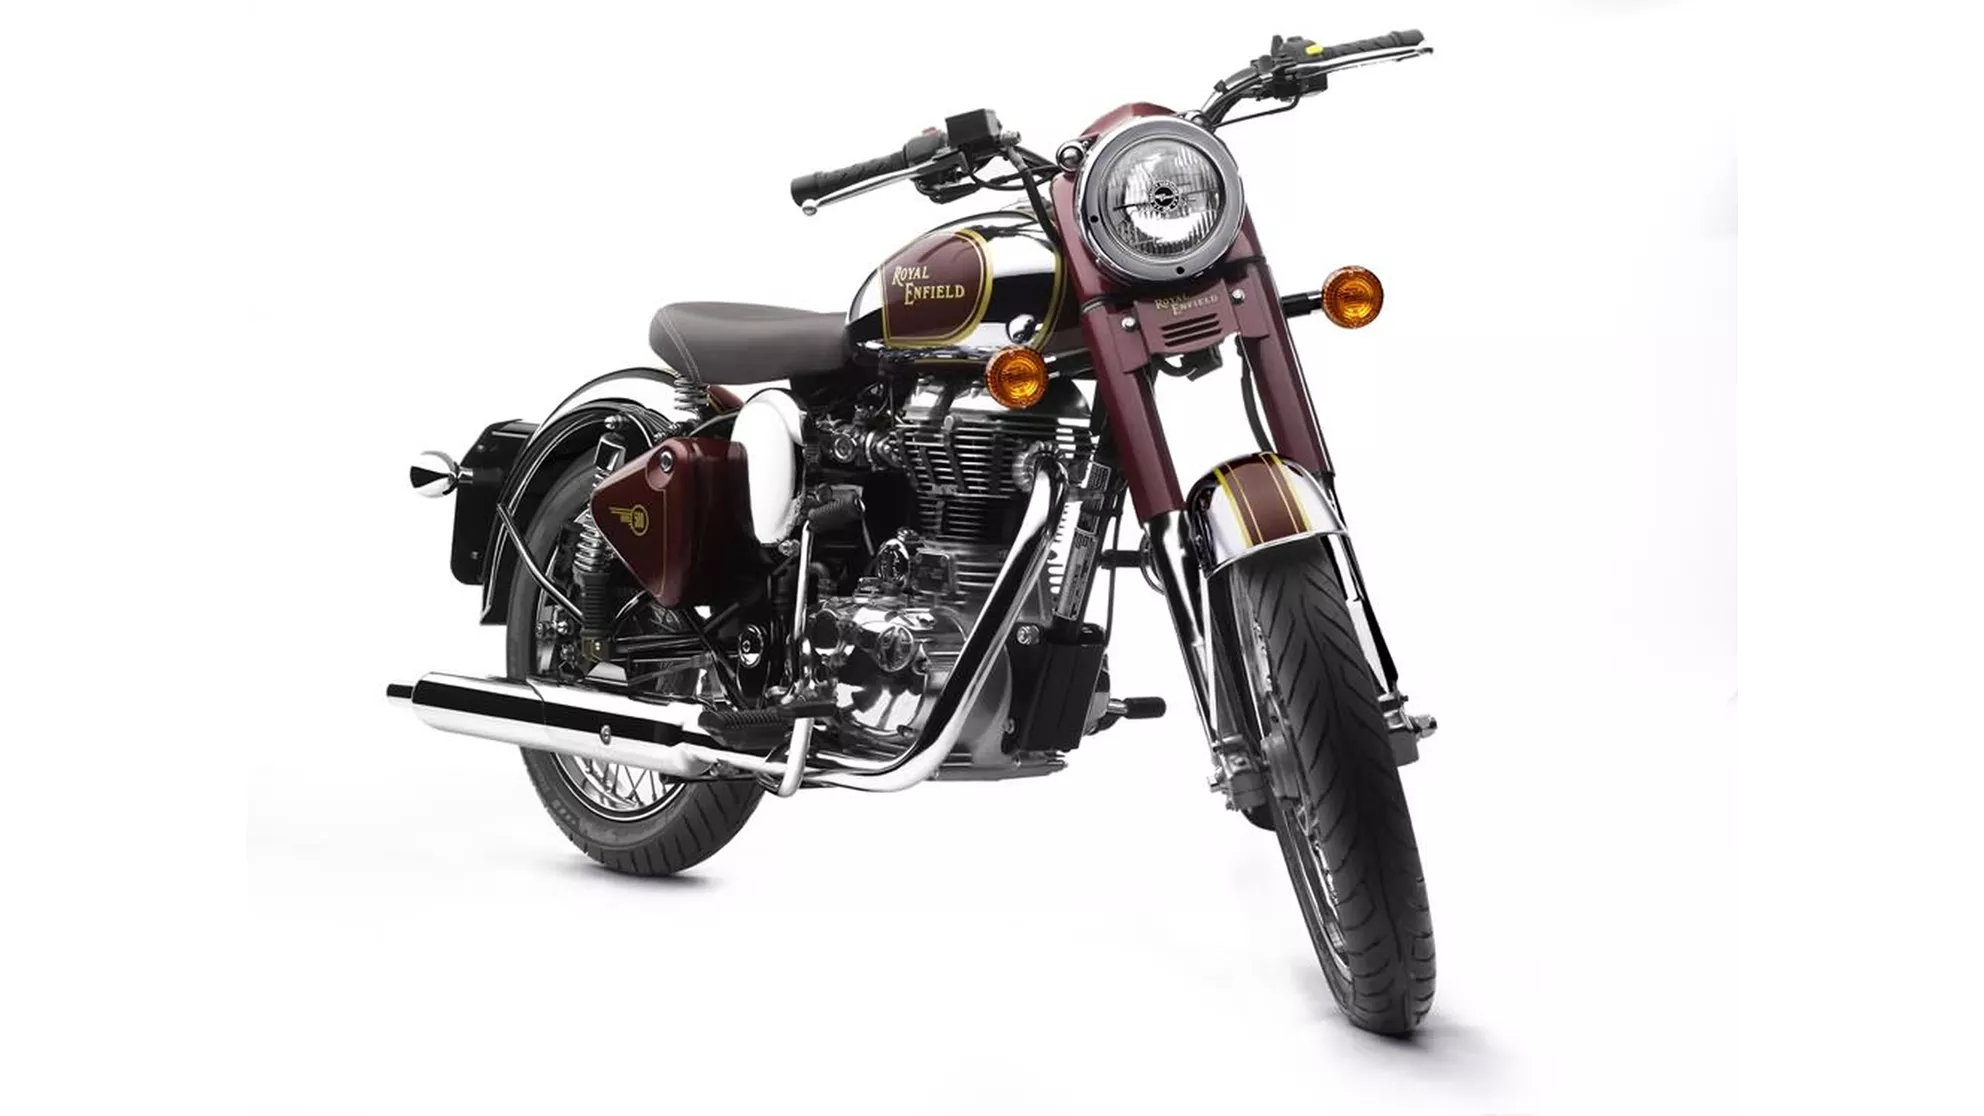 Royal Enfield Bullet 500 Classic Chrome - Image 4